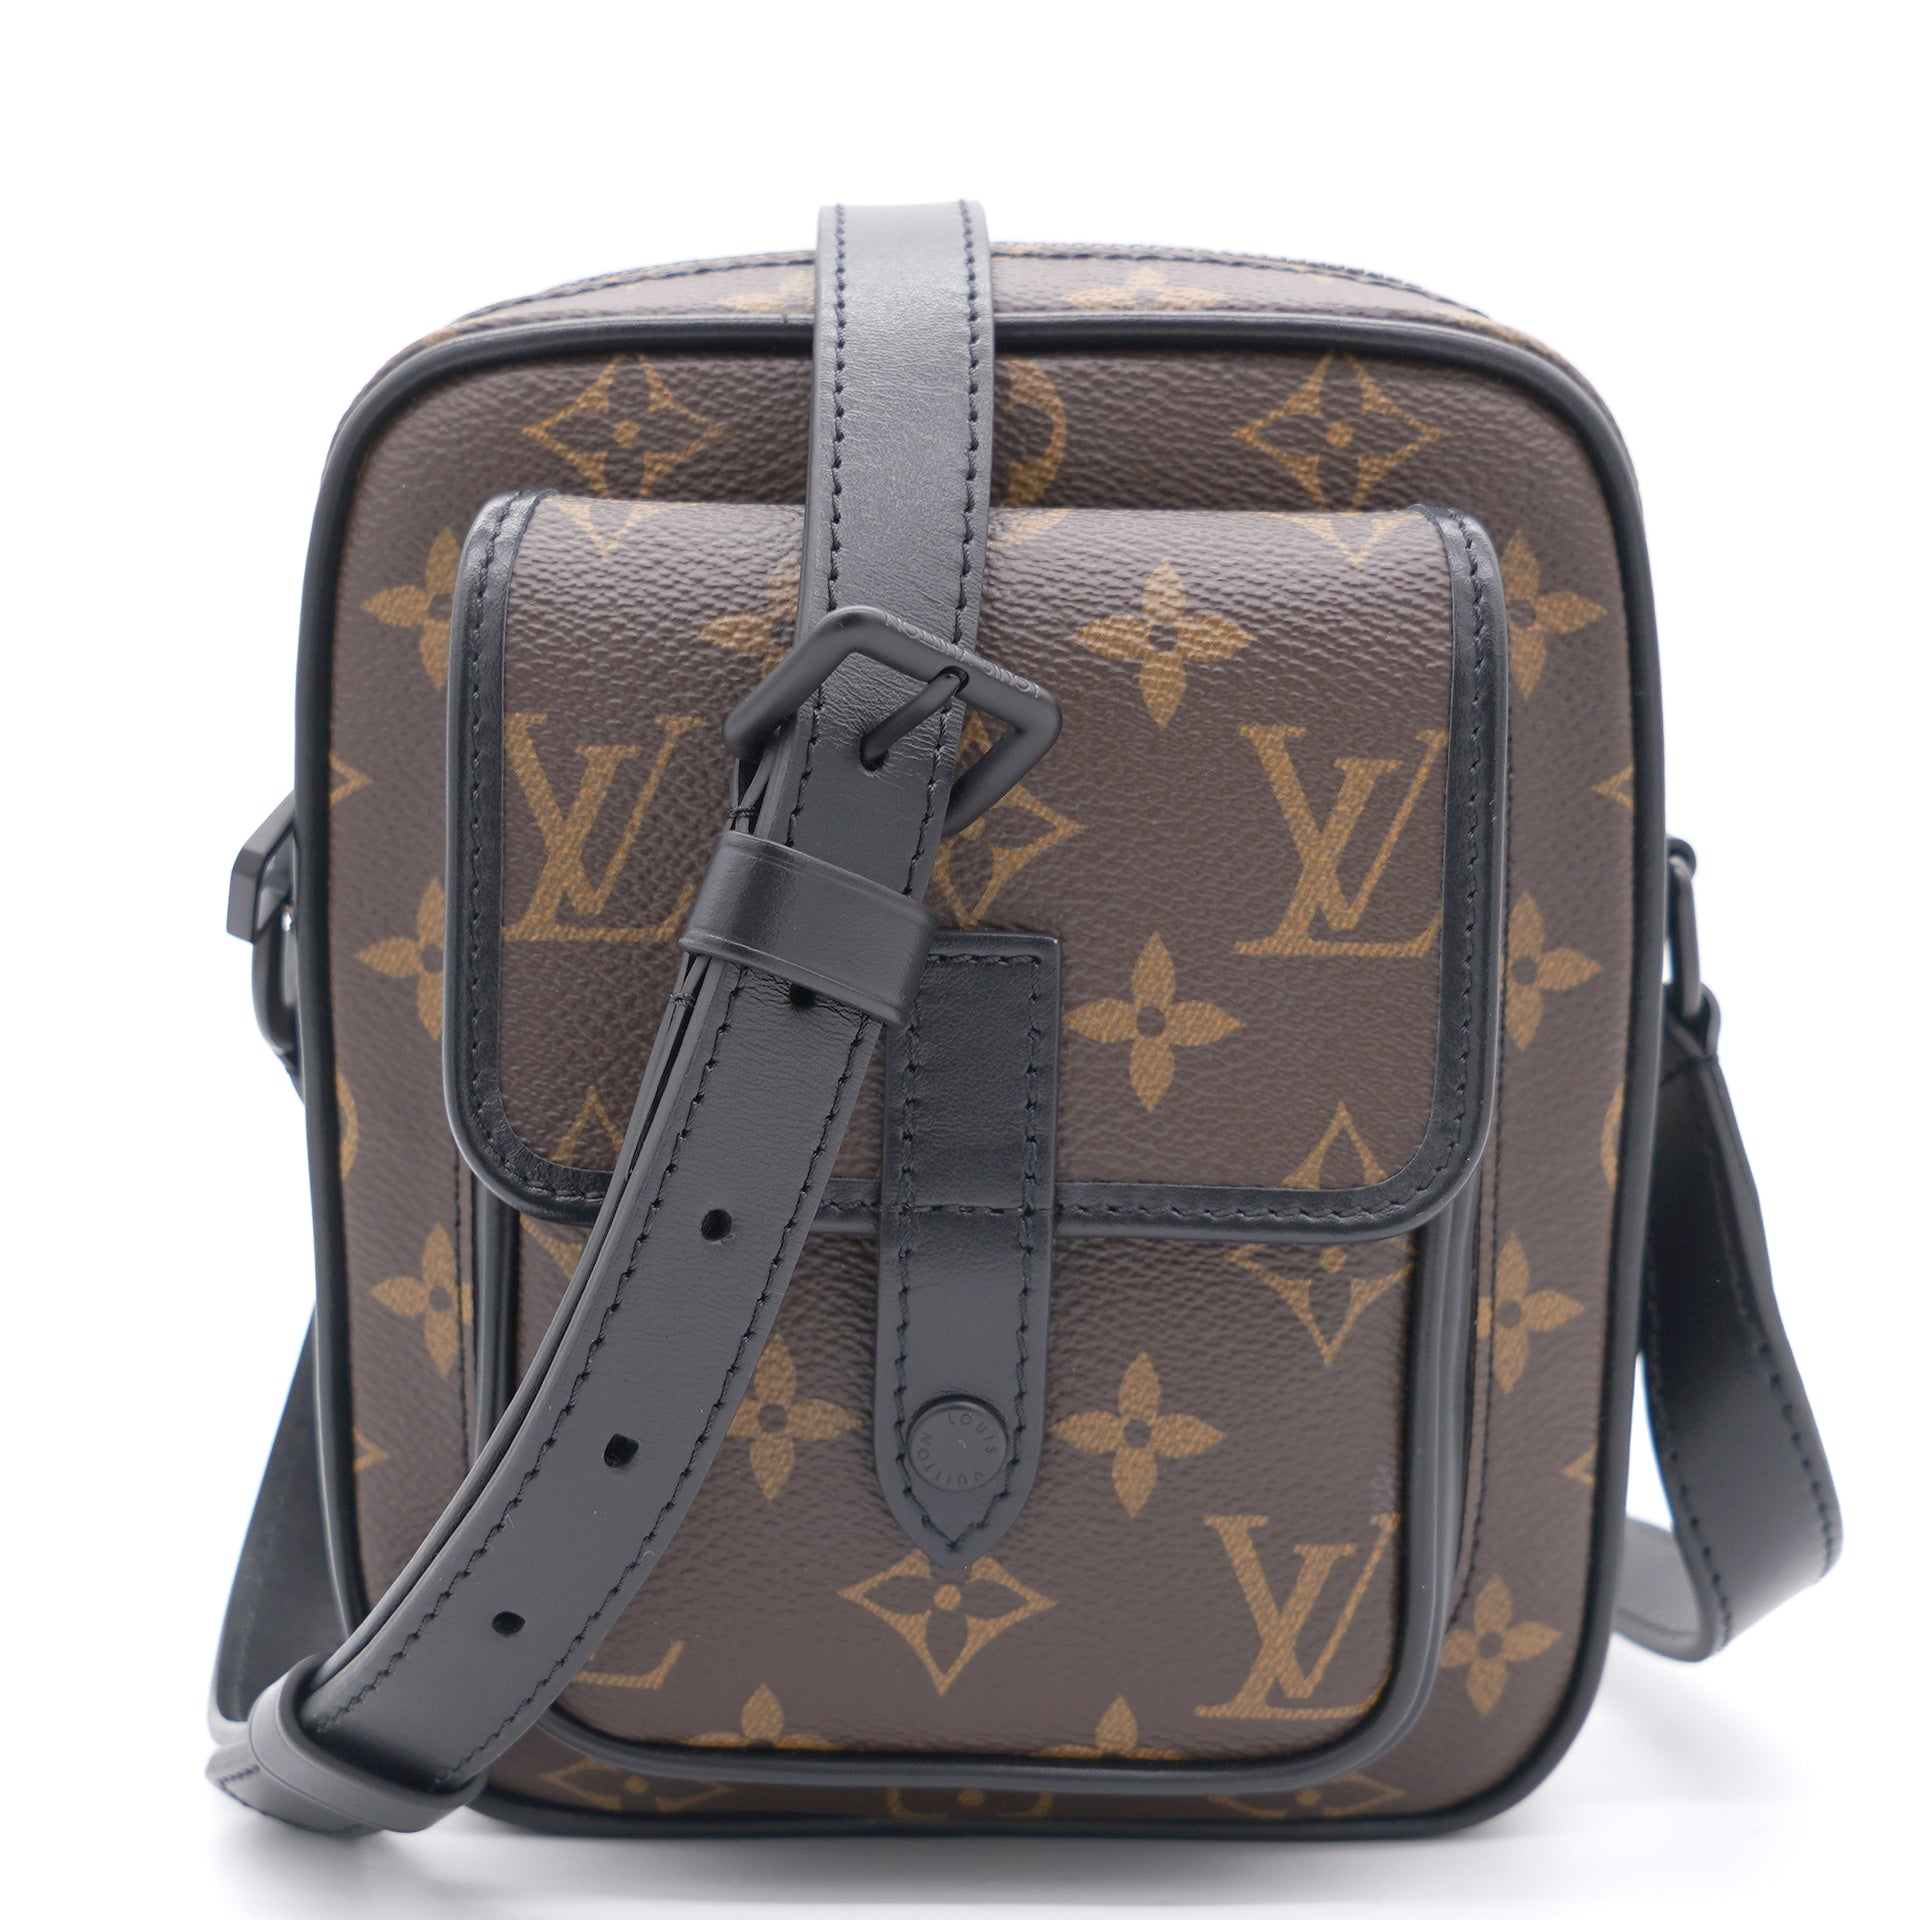 Louis Vuitton Christopher Wearable Wallet Review - What Fits